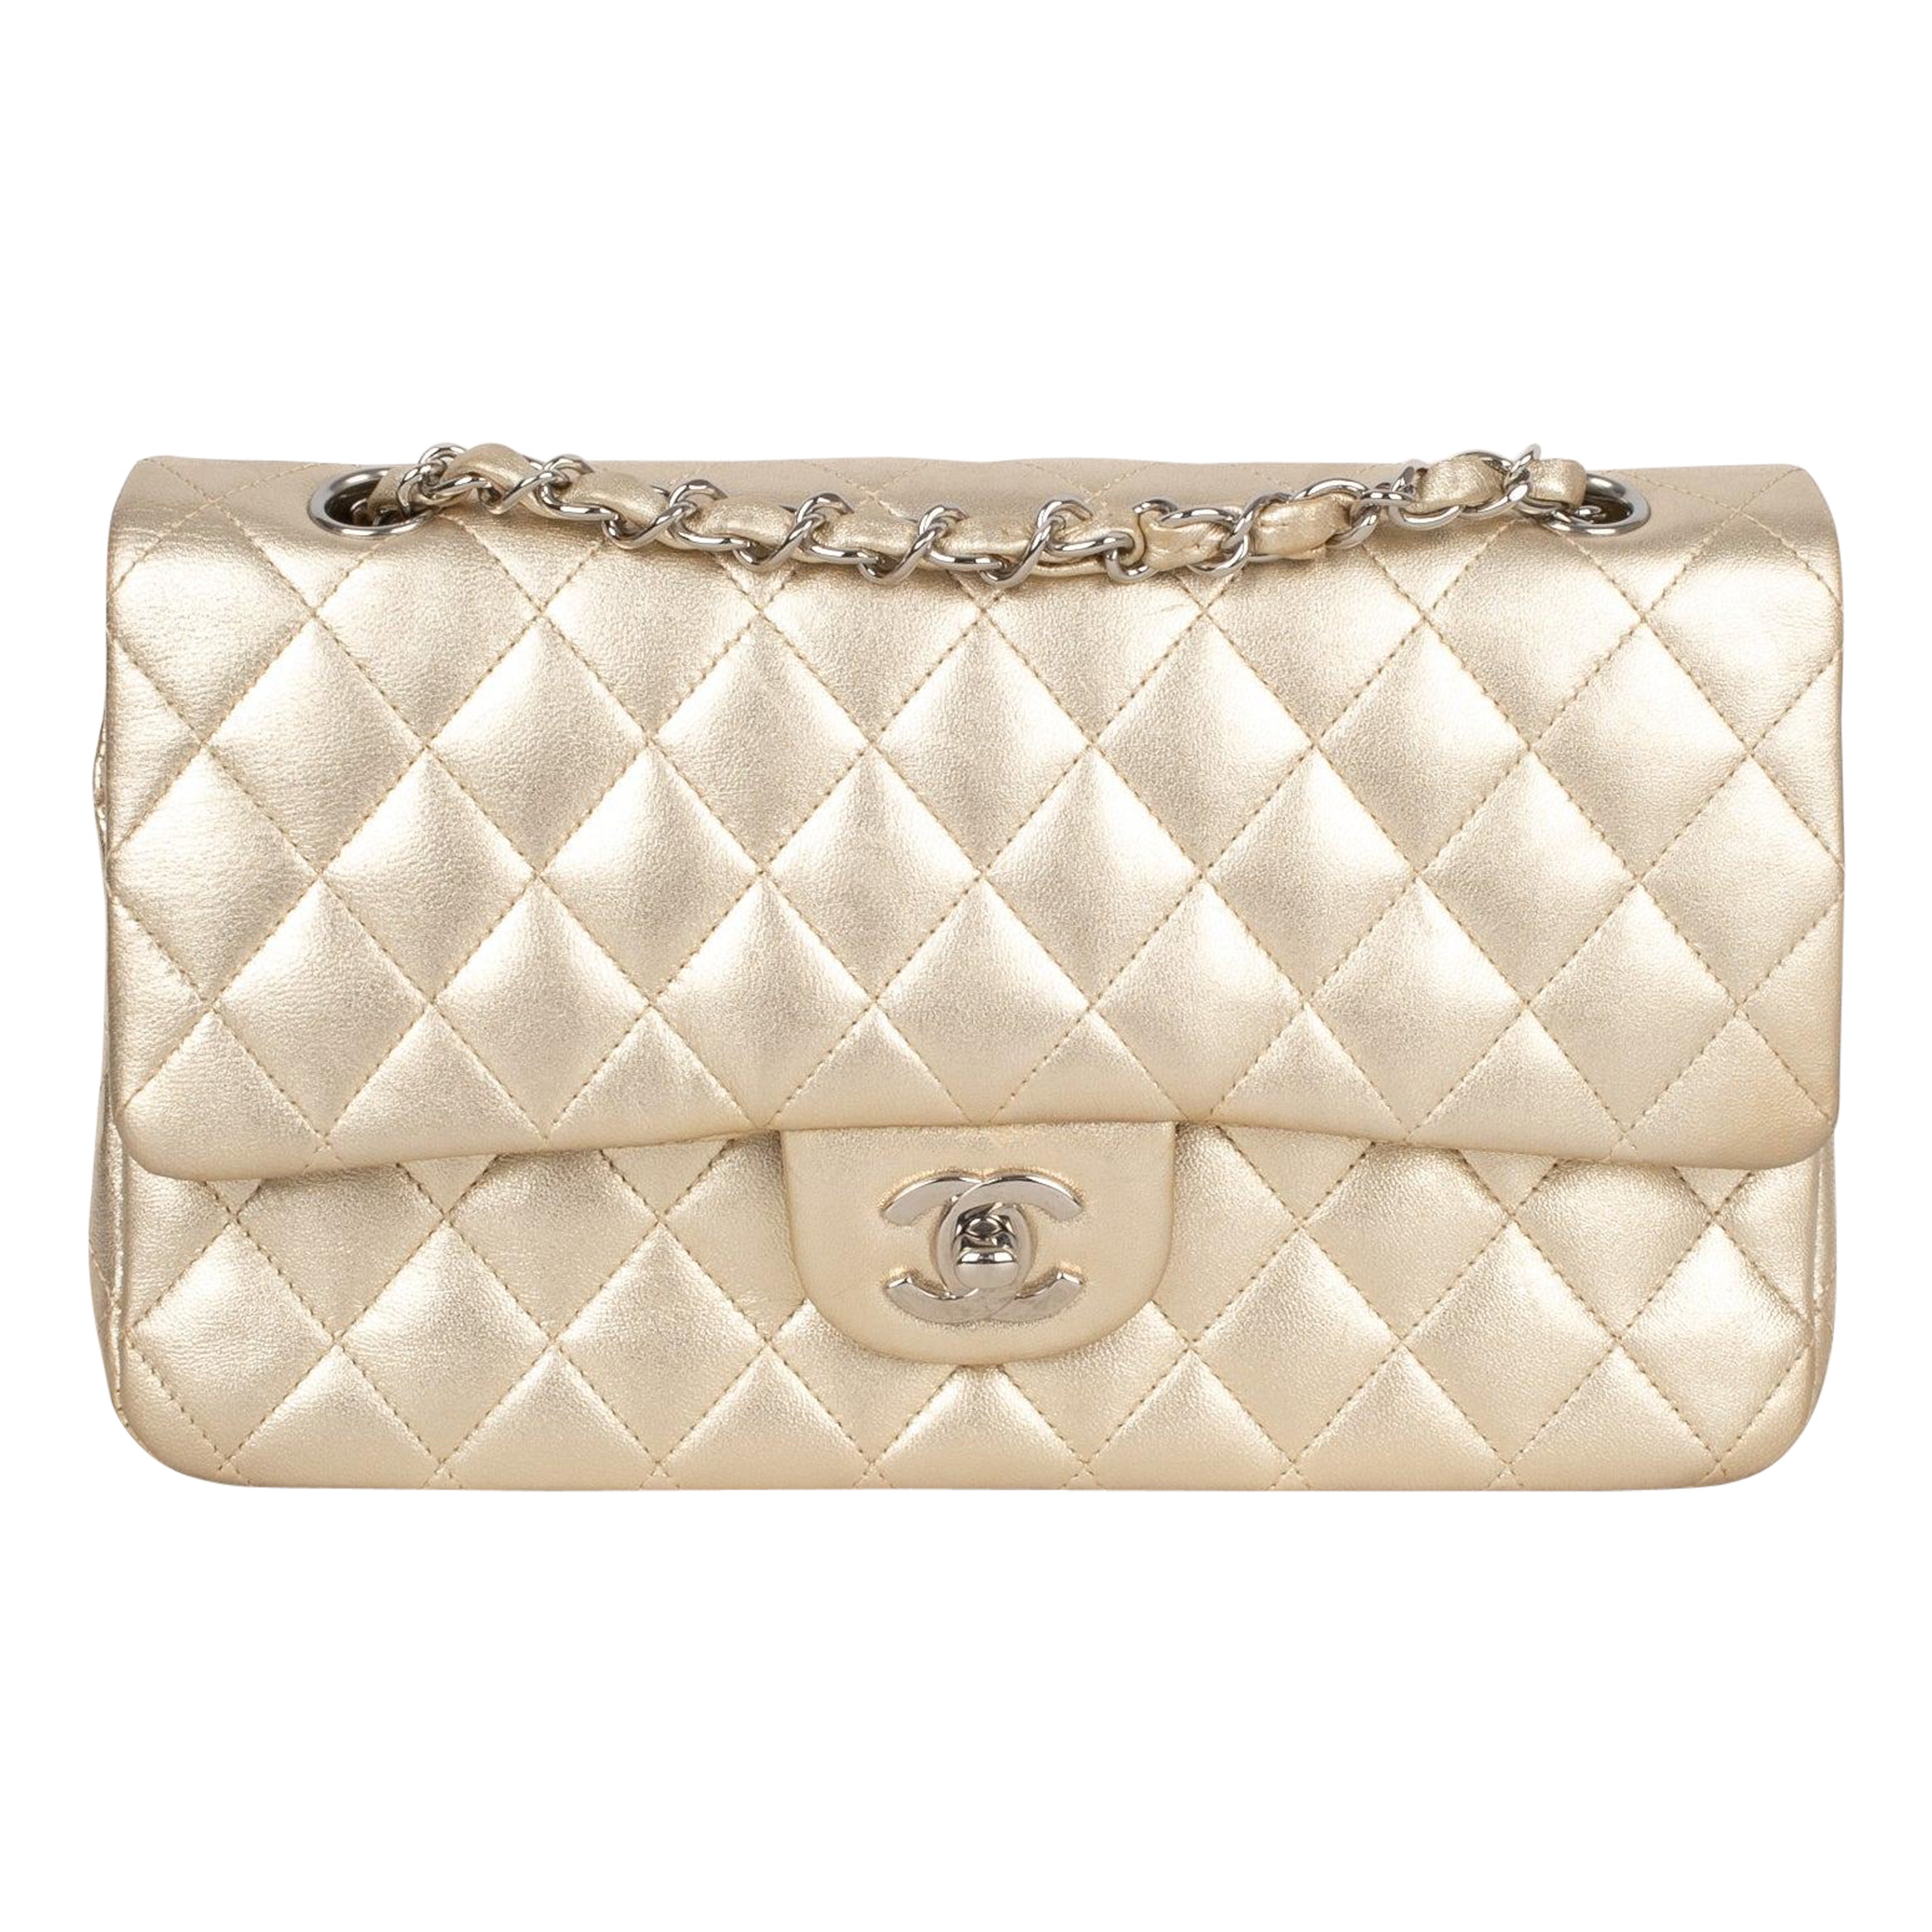 Chanel Timeless Pale-Golden Metallic Lamb Leather Classic Bag, 2006/2008 For Sale